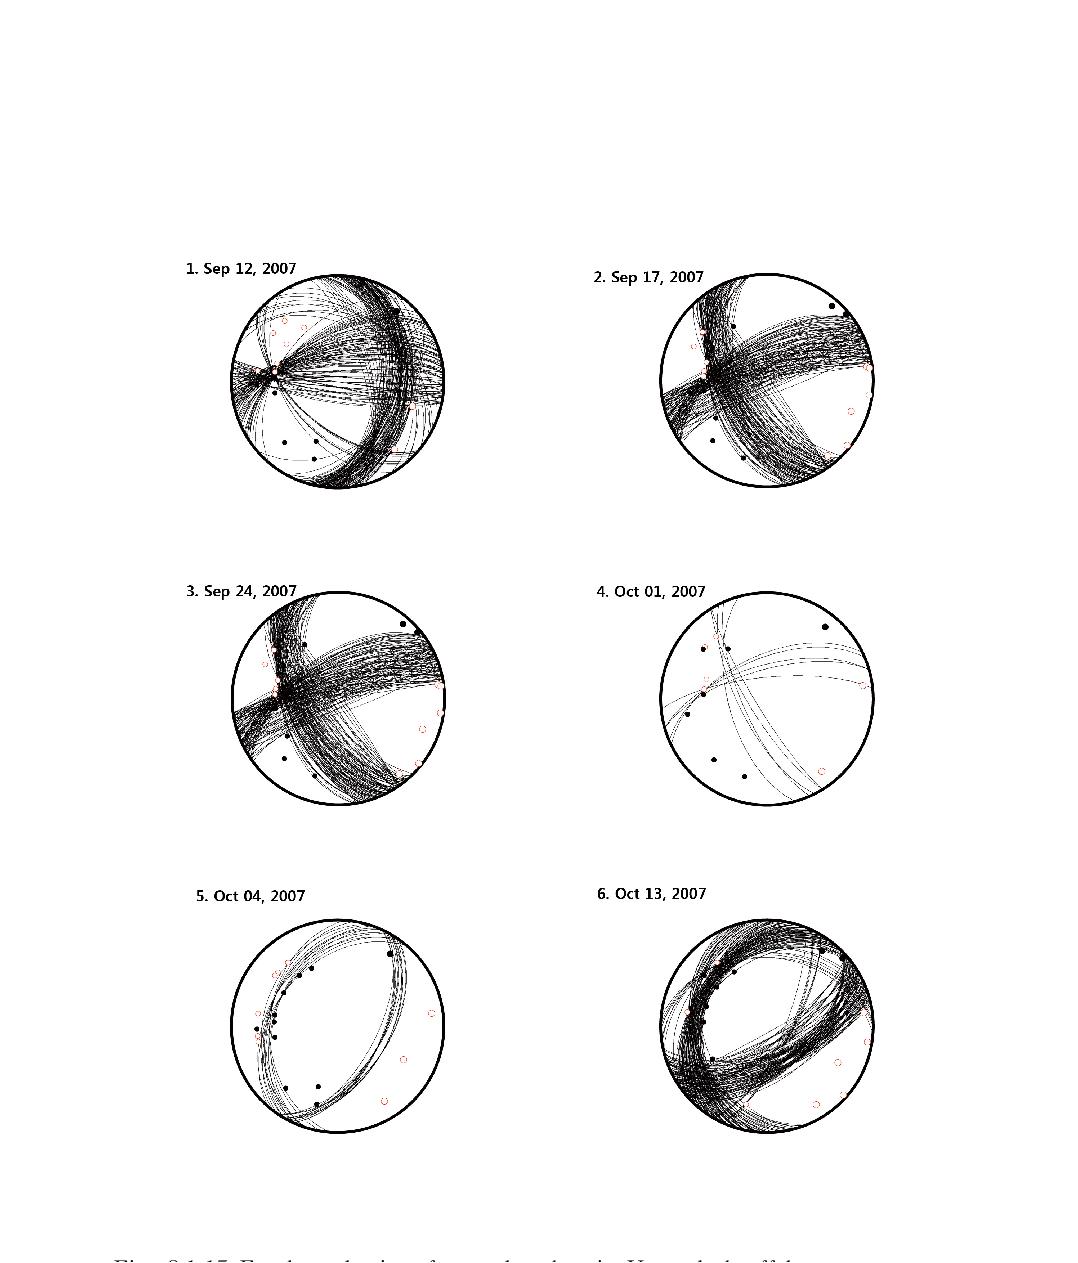 Focal mechanism for earthquakes in Yeongdeok offshore.